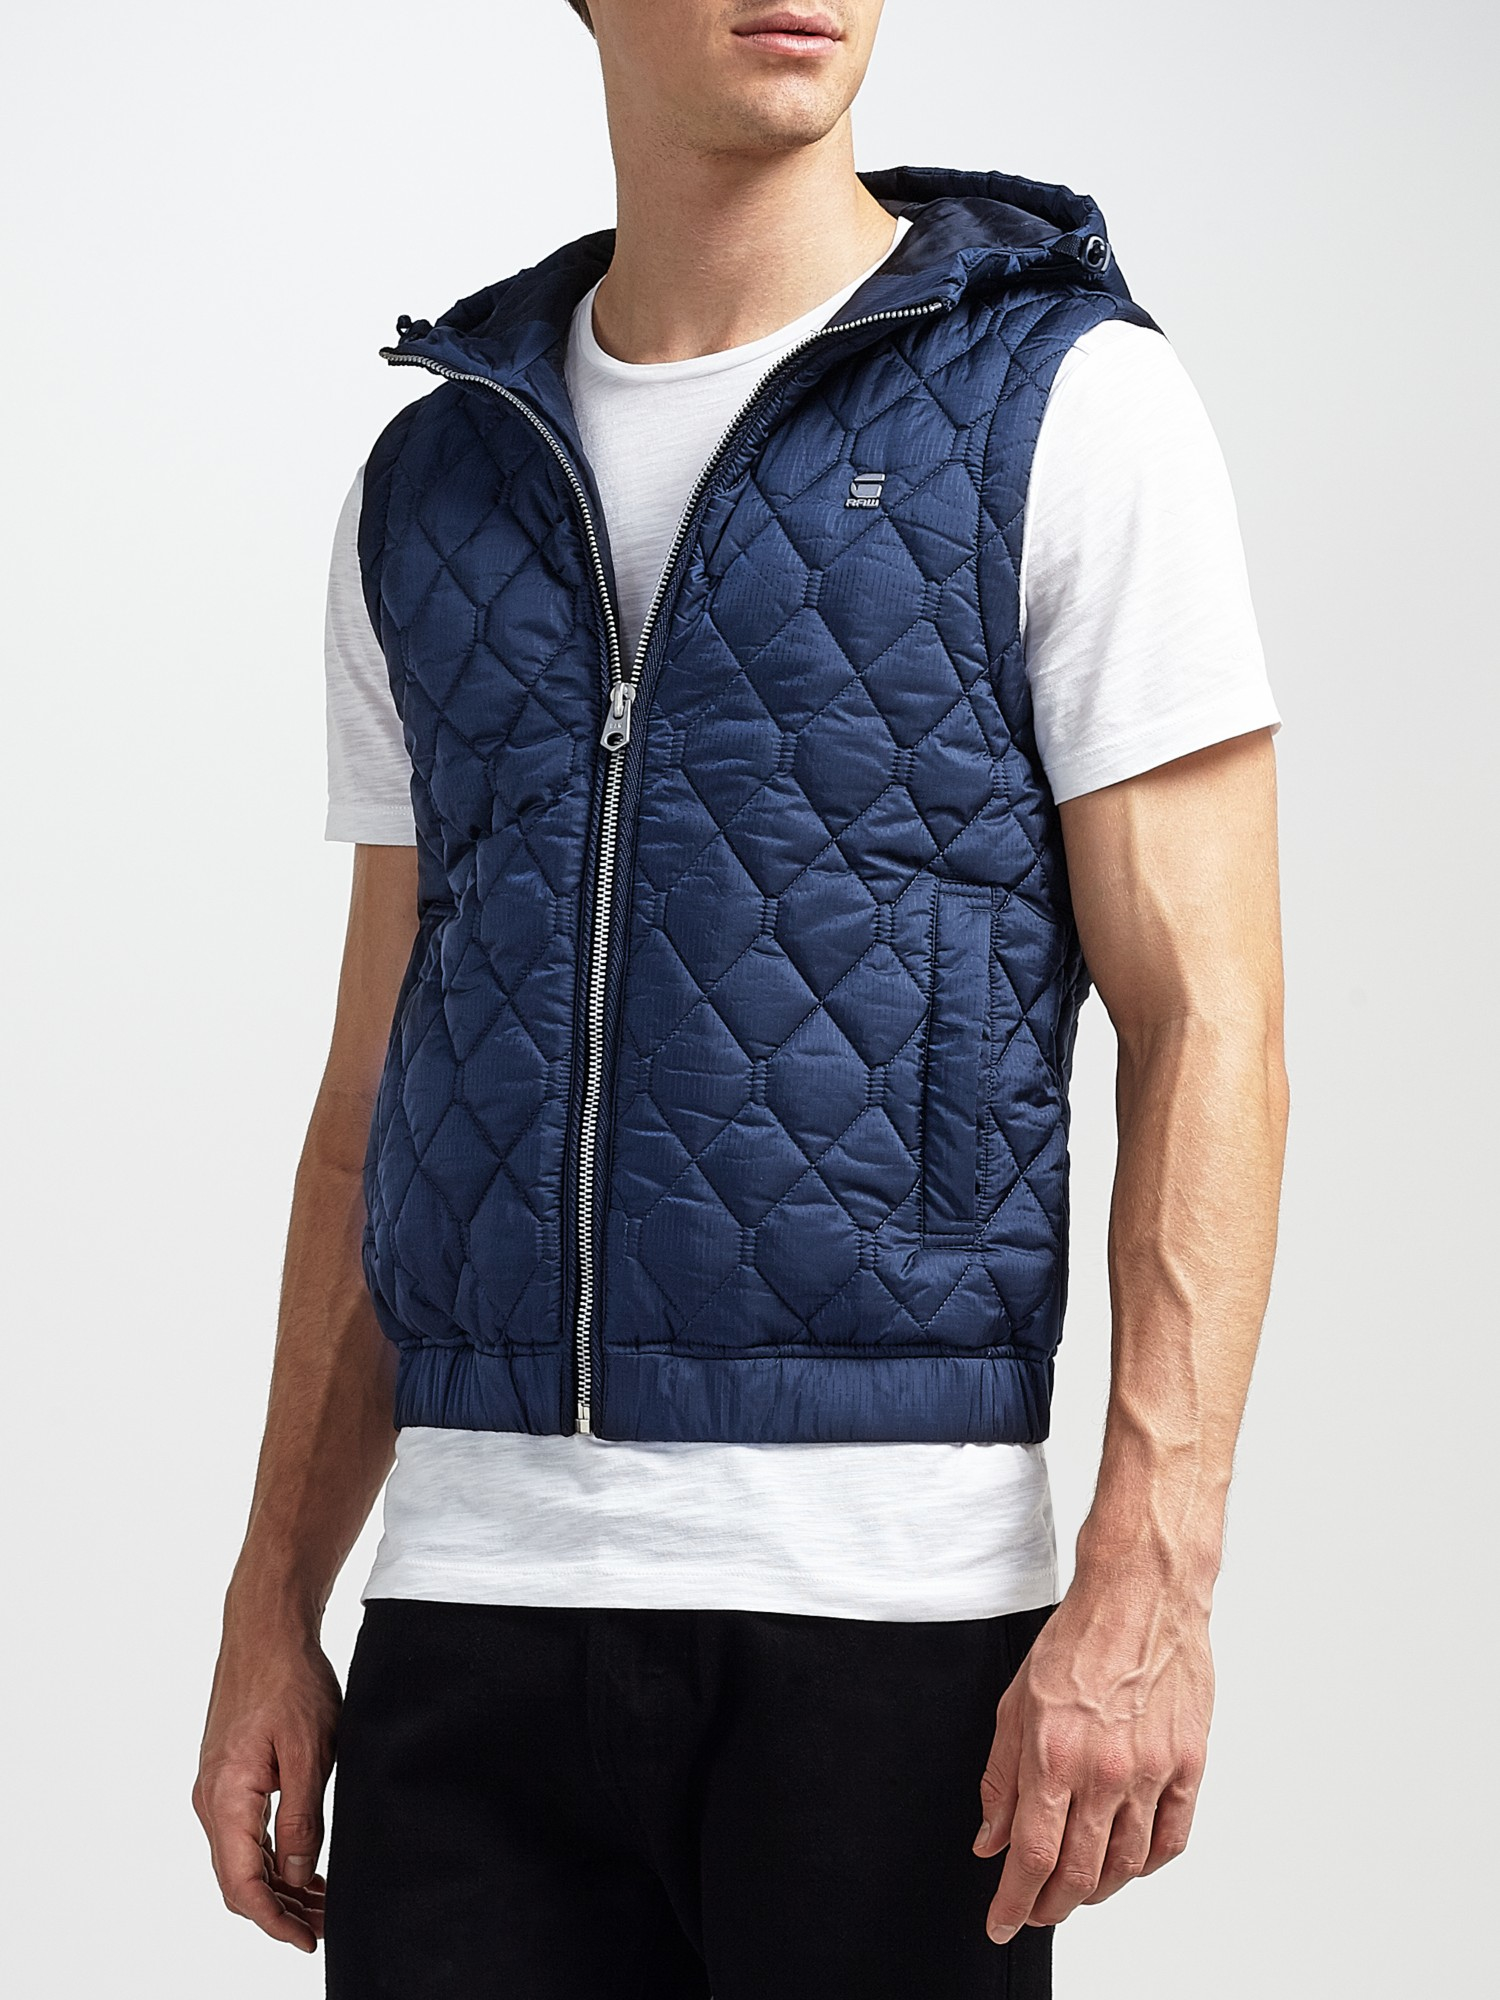 G-Star RAW Synthetic Meefic Quilted Hooded Gilet in Blue for Men - Lyst